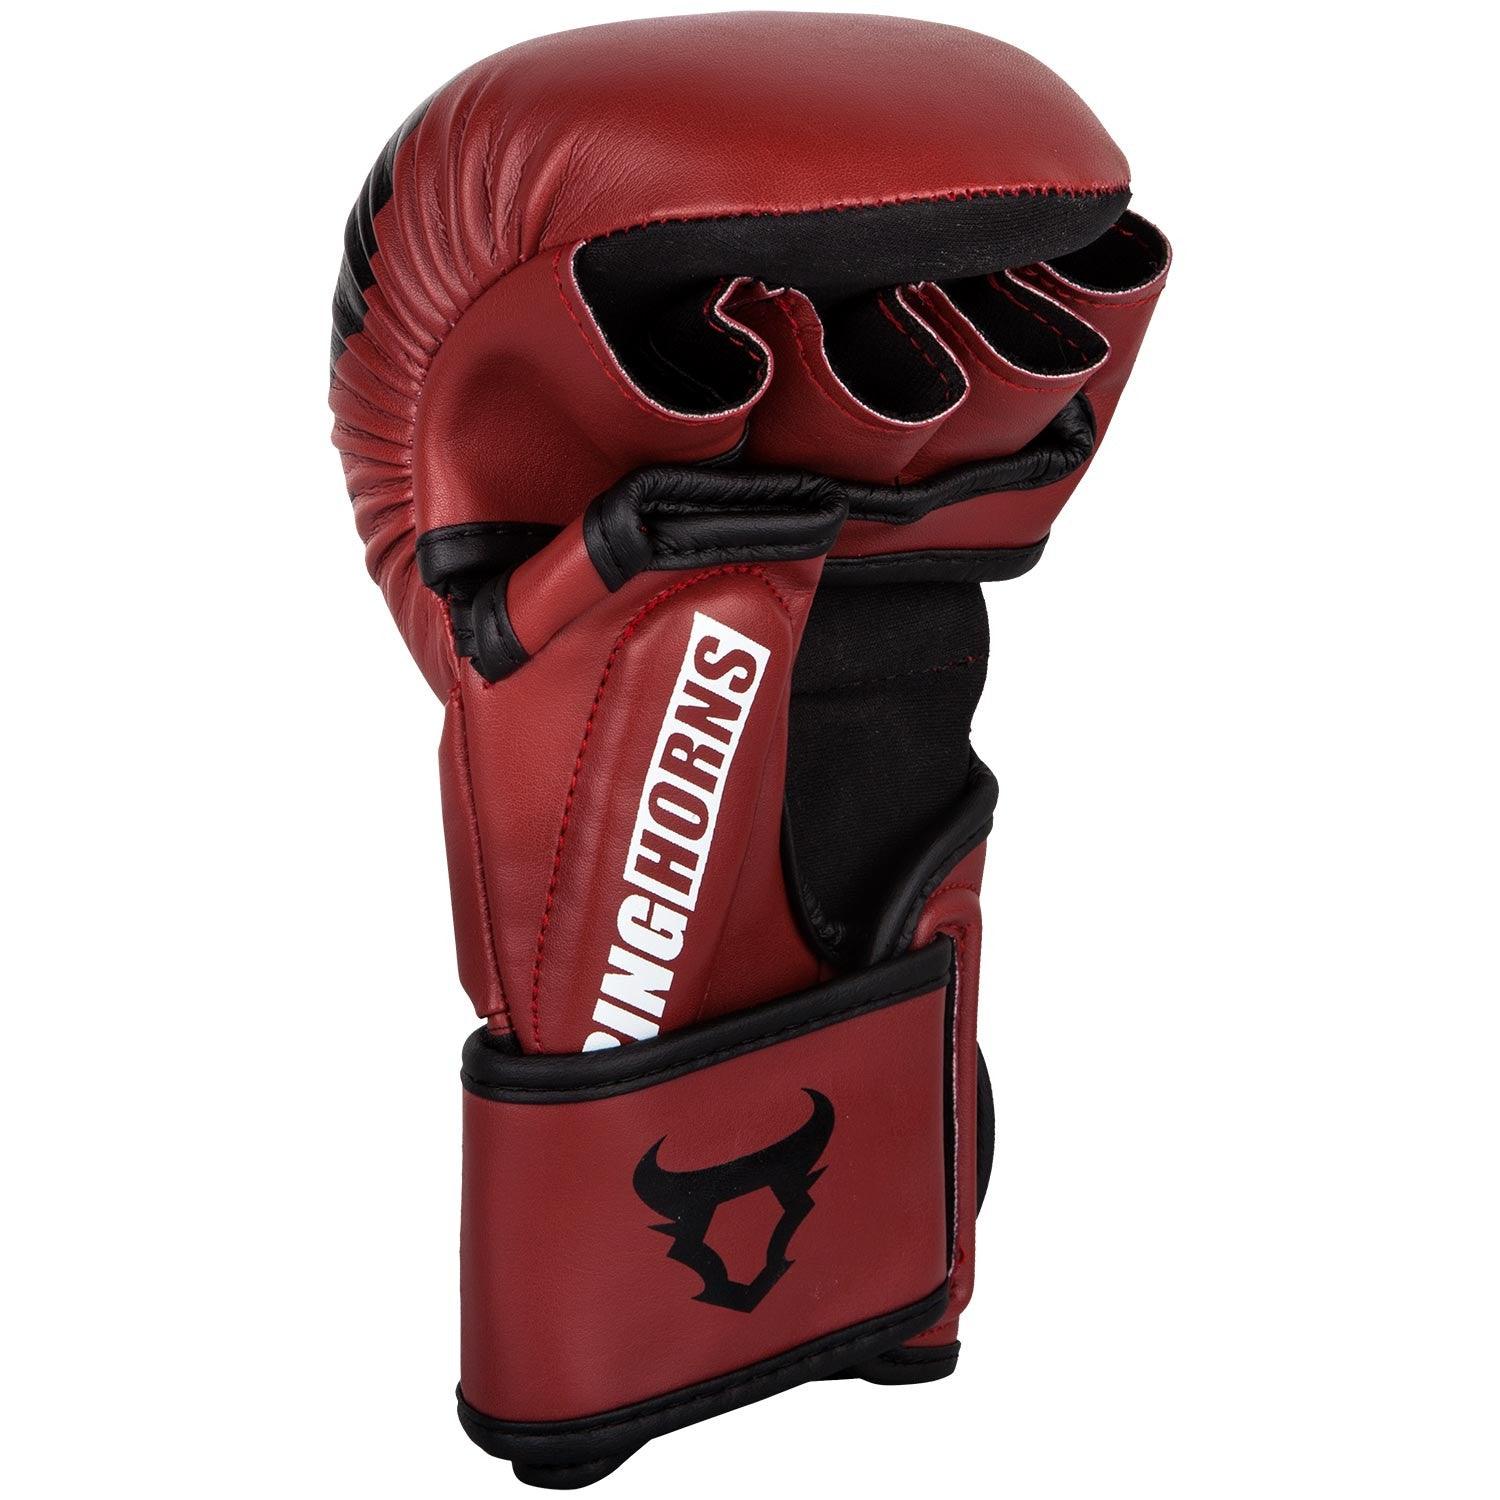 Ringhorns Charger Sparring Gloves - Red Picture 3